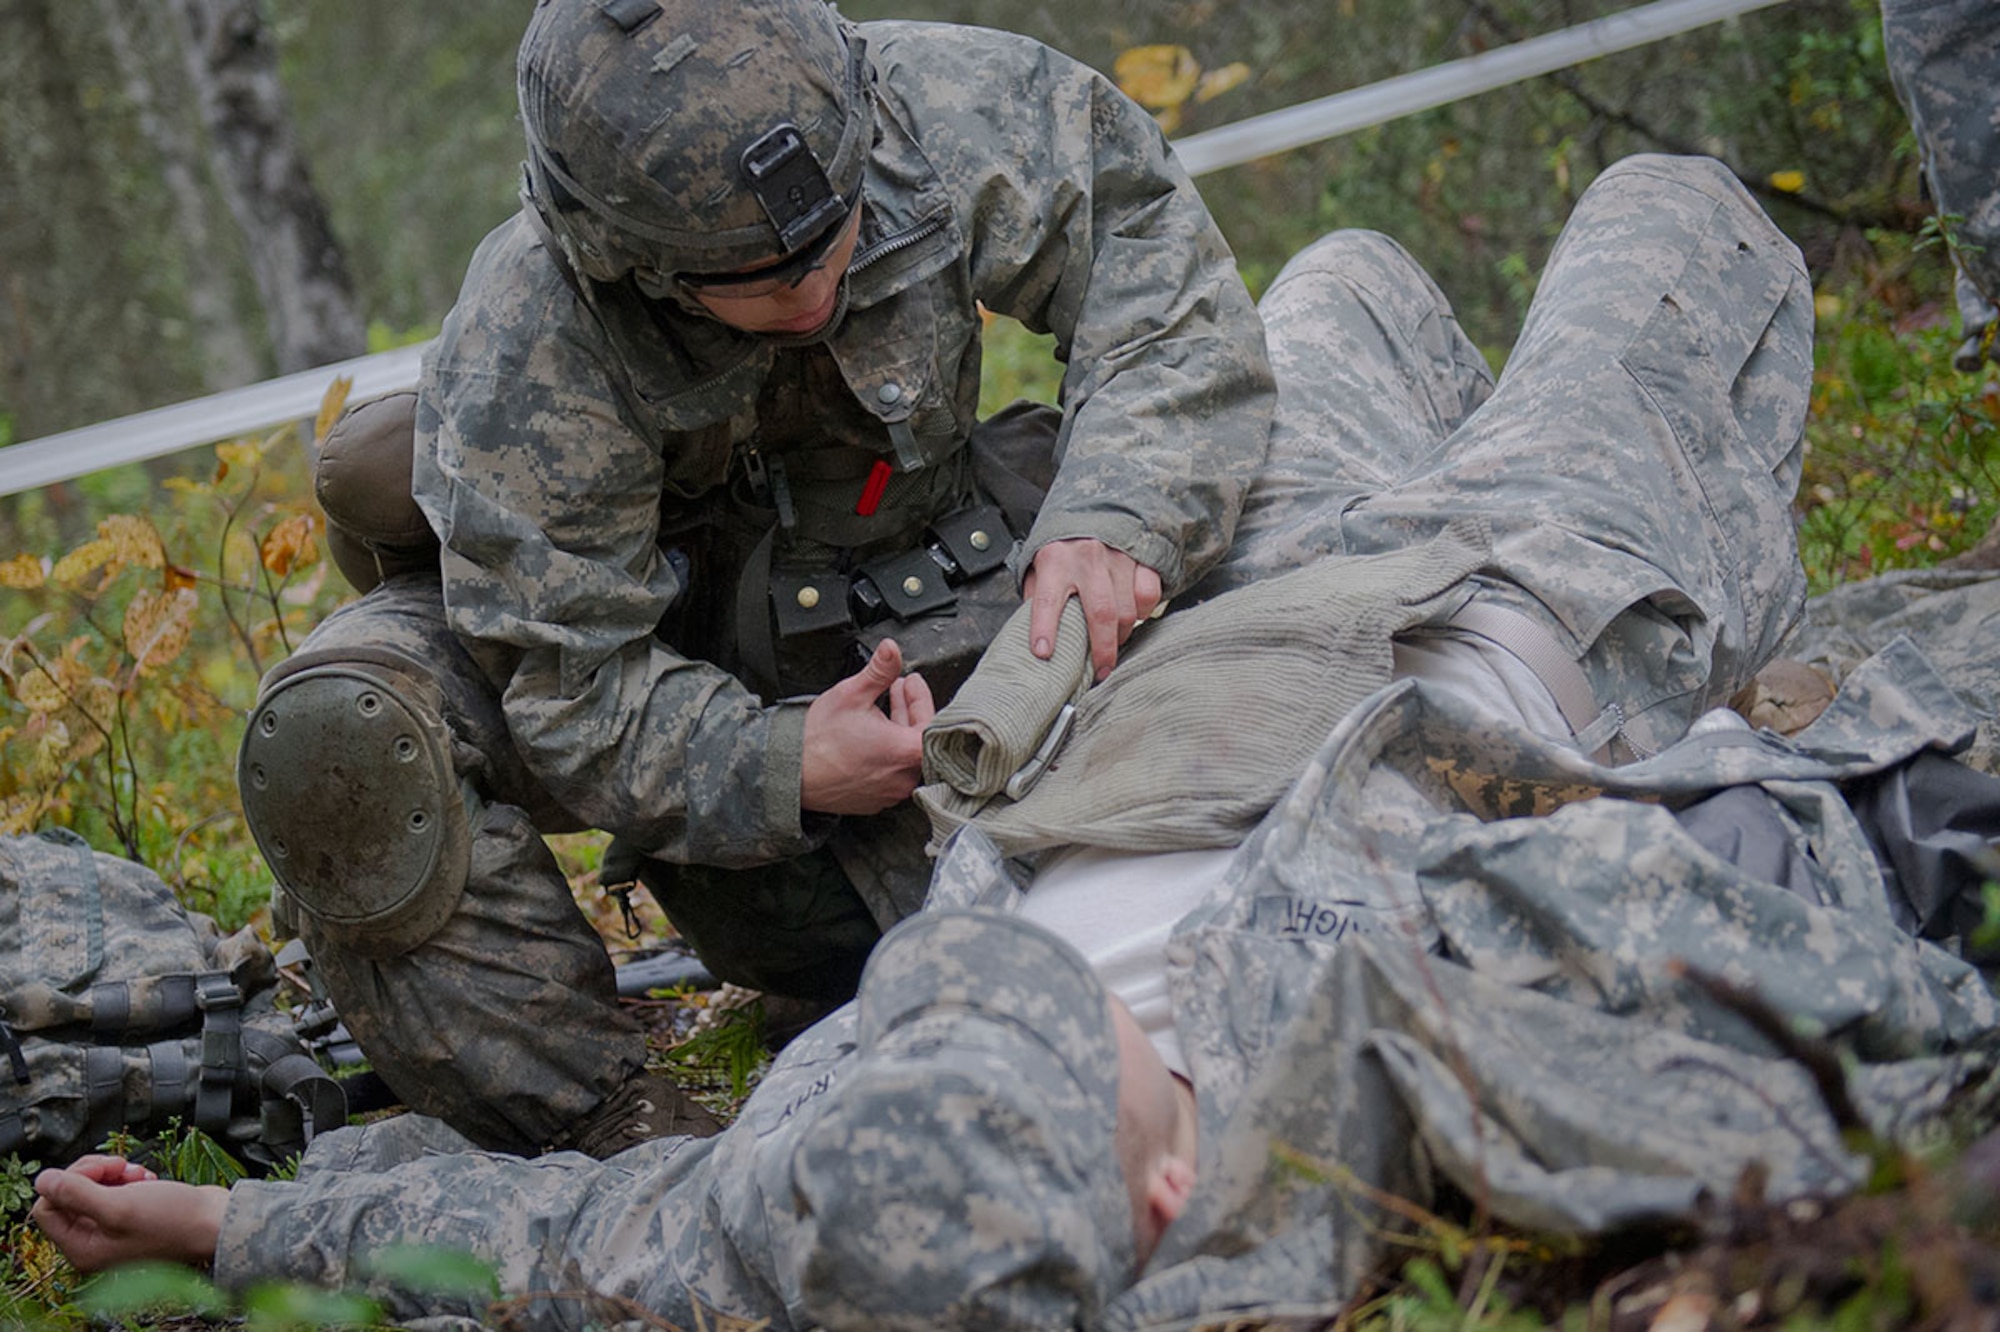 Army Spc. Luis Garcia, a native of Phoenix, Ariz., assigned to Commanche Company, 1st Battalion (Airborne), 501st Infantry Regiment, 4th Infantry Brigade Combat Team (Airborne), 25th Infantry Division, U.S. Army Alaska, performs buddy aid for a simulated casualty on an Expert Infantryman Badge qualification lane on Joint Base Elmendorf-Richardson, Wednesday, Sept. 10, 2014. The Expert Infantryman Badge was approved by the Secretary of War on October 7, 1943, and is currently awarded to U.S. Army personnel who hold infantry or special forces military occupational specialties and successfully pass the rigors of the course. (U.S. Air Force photo/Justin Connaher)